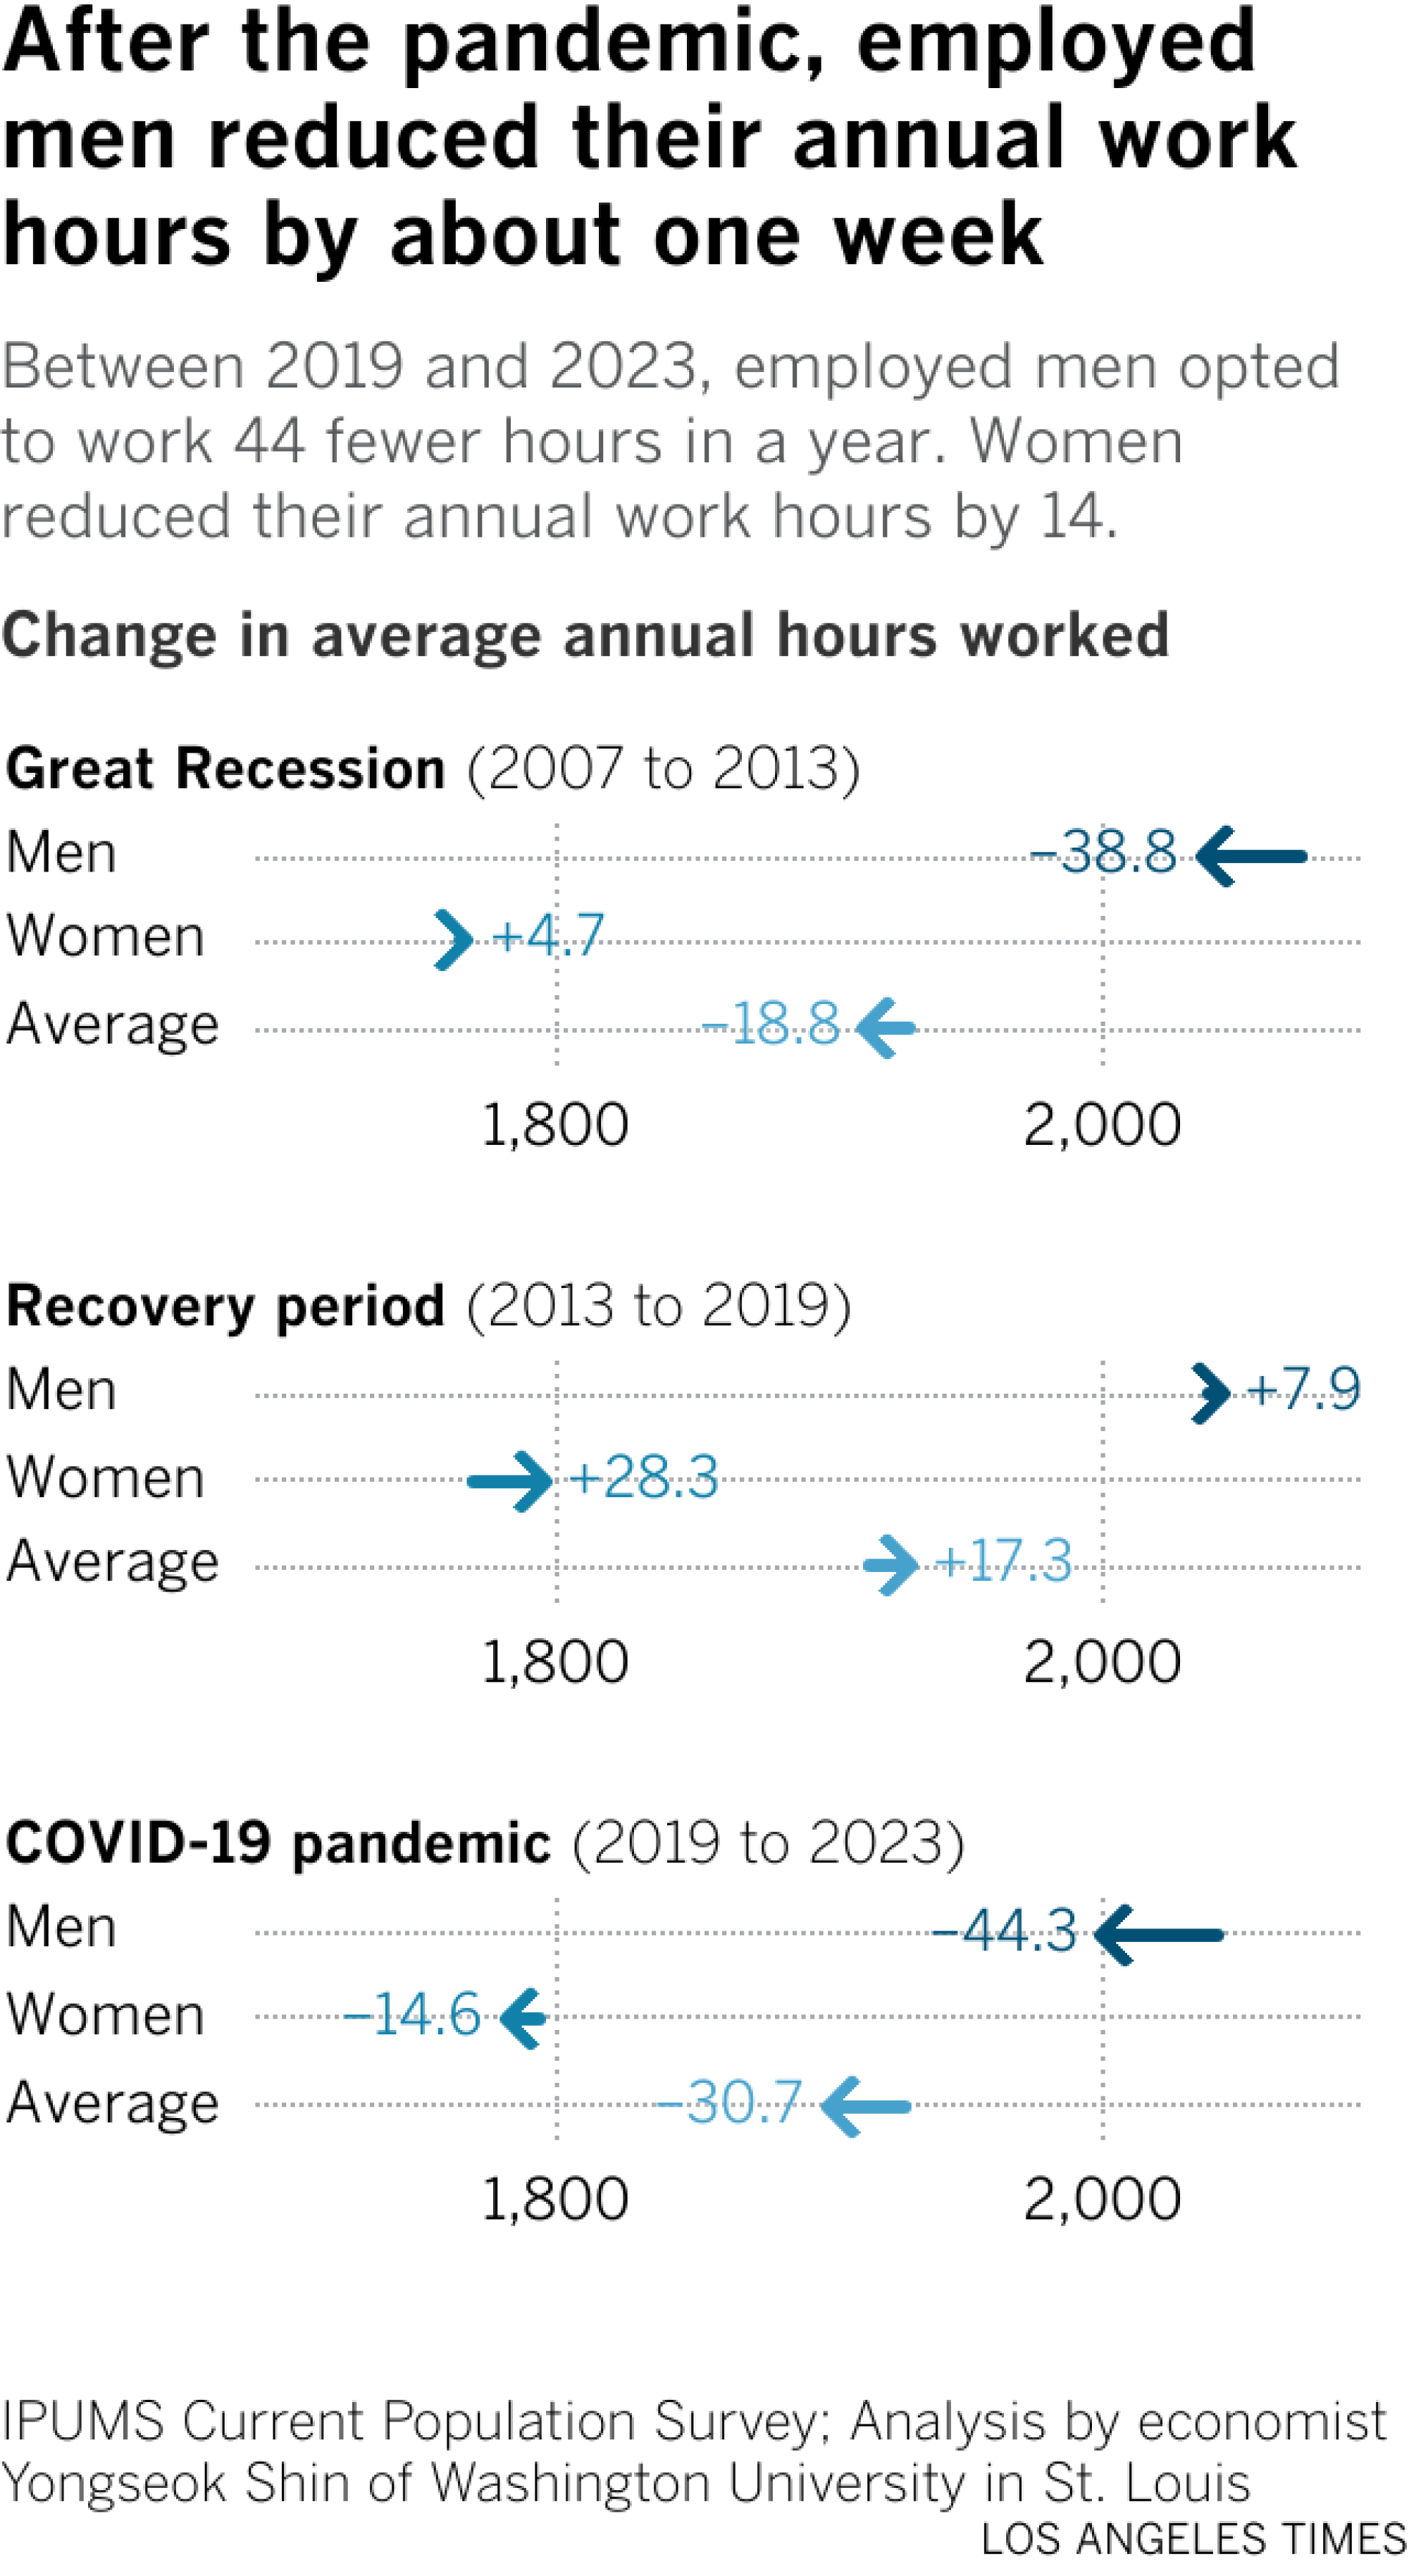 Between 2019 and 2023, employed men opted to work 44 fewer hours in a year. Women reduced their annual work hours by 14.